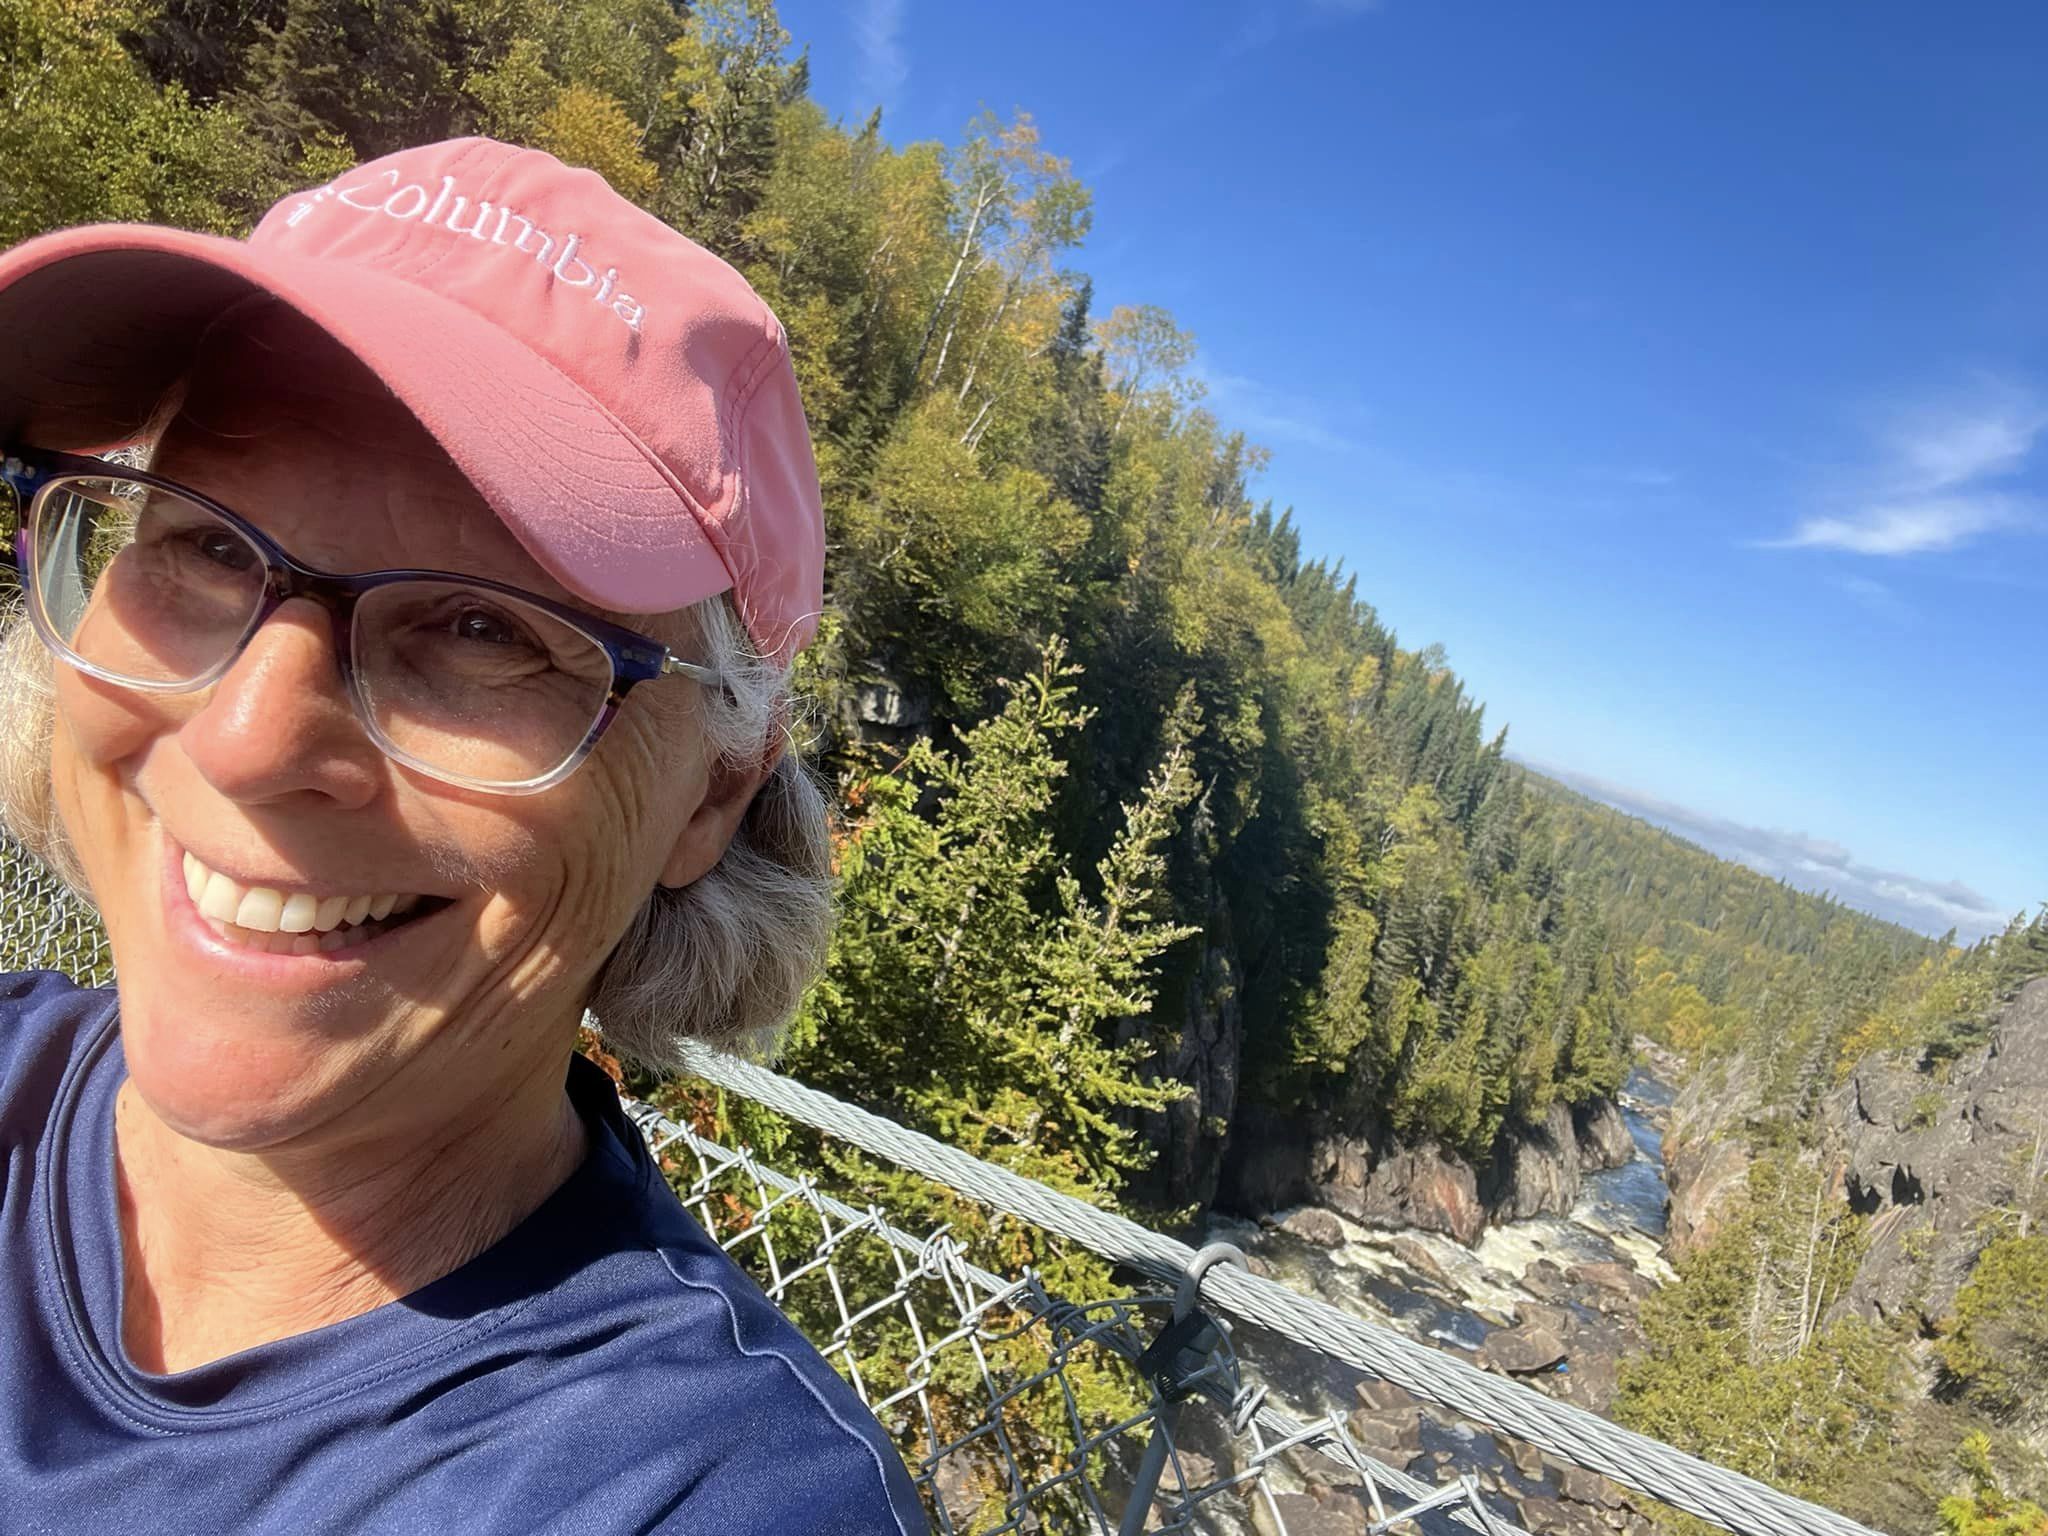 Laura McGregor smiling on a suspension bridge over a rocky riverbed filled with green spruce forest, under a bright blue sky.